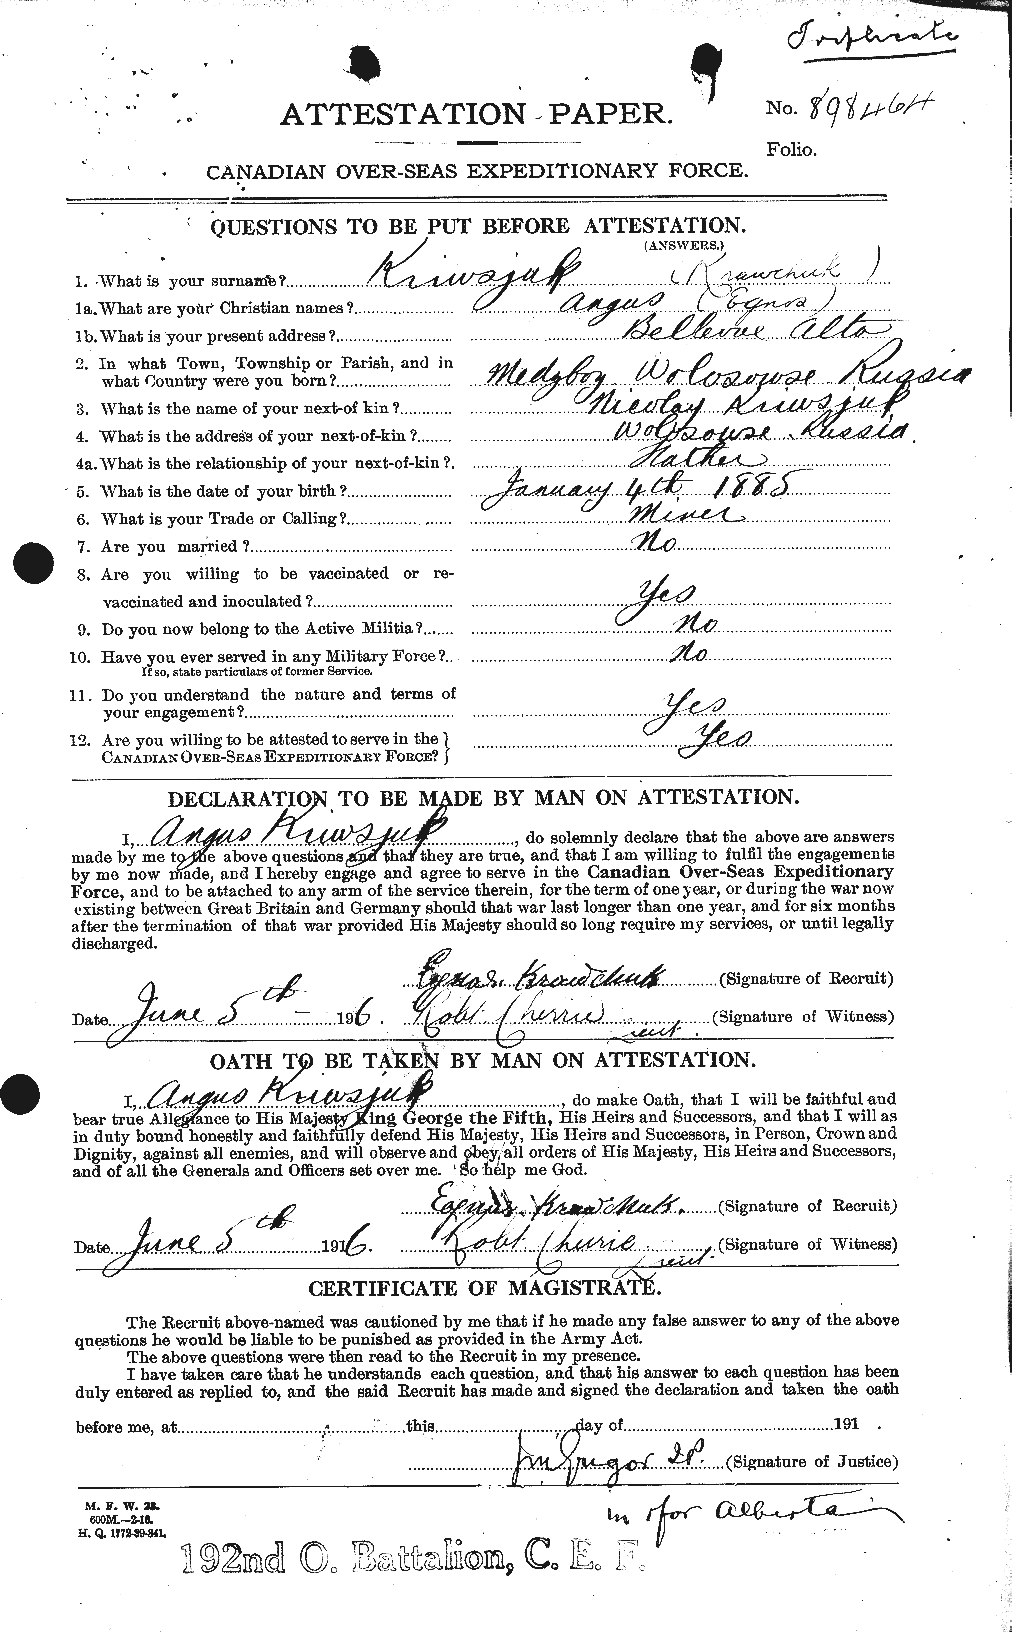 Personnel Records of the First World War - CEF 446173a